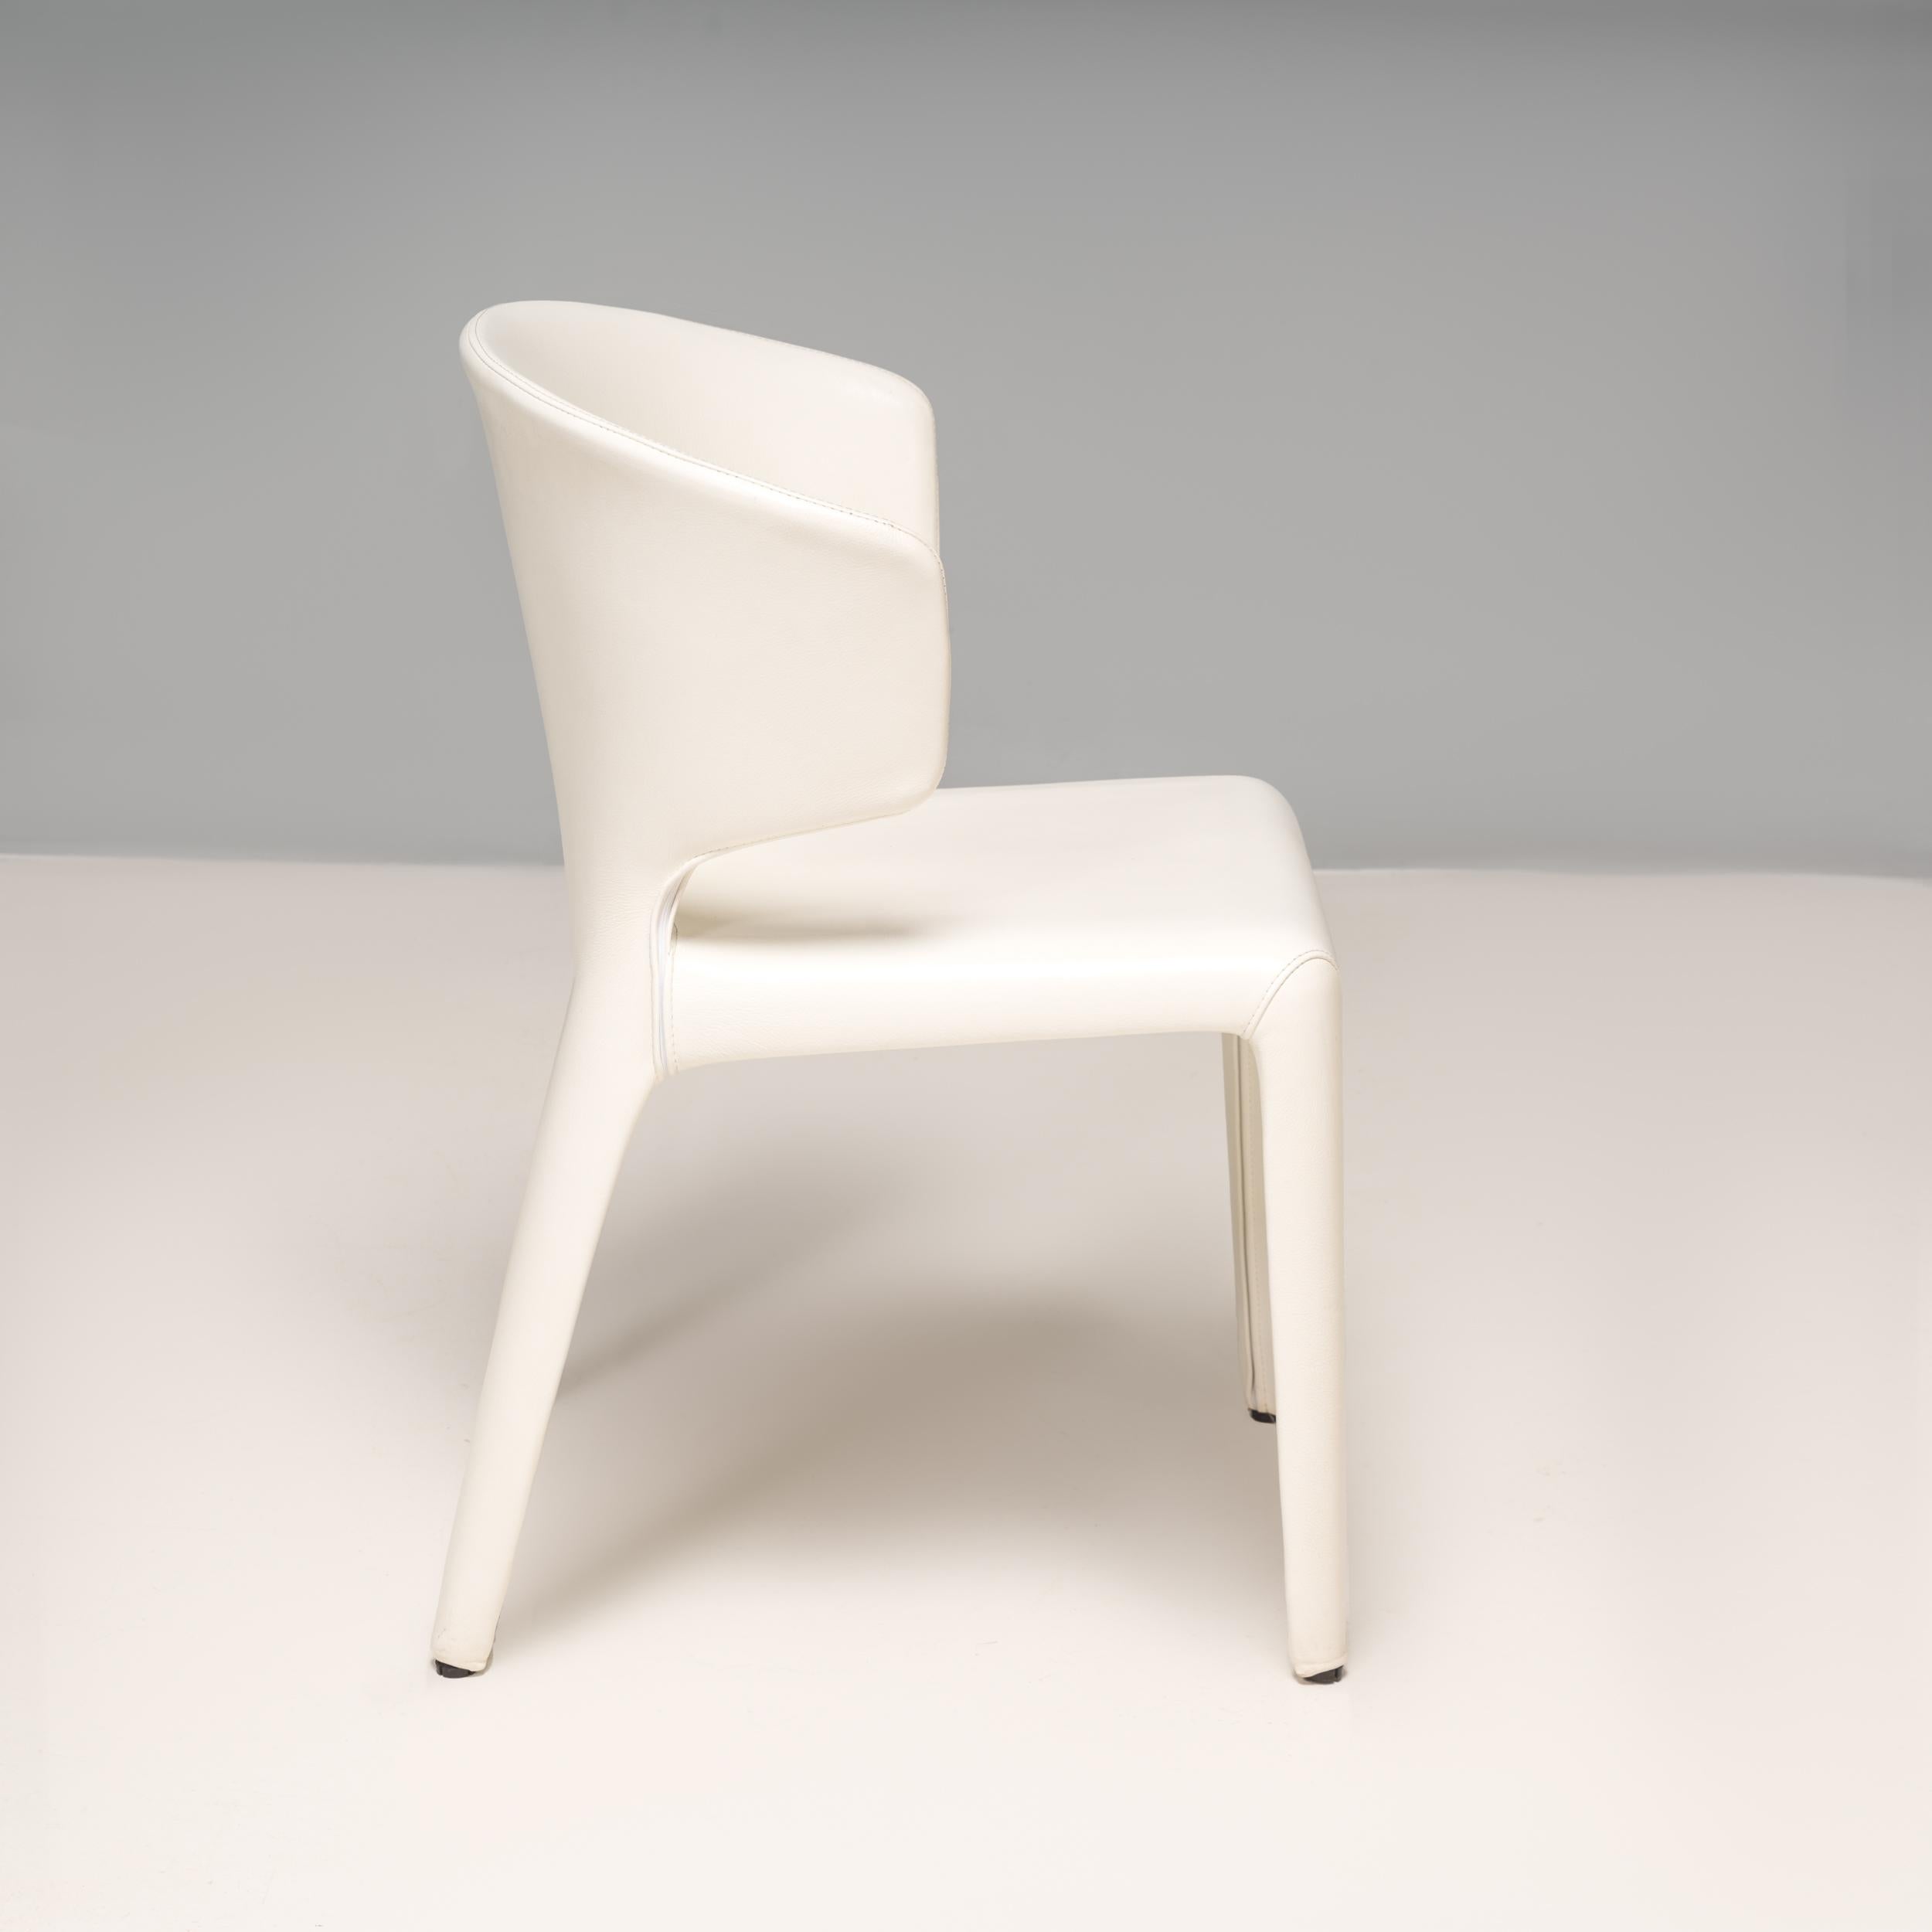 Cassina by Hannes Wettstein 367 Hola White Leather Dining Chairs, Set of 8 2